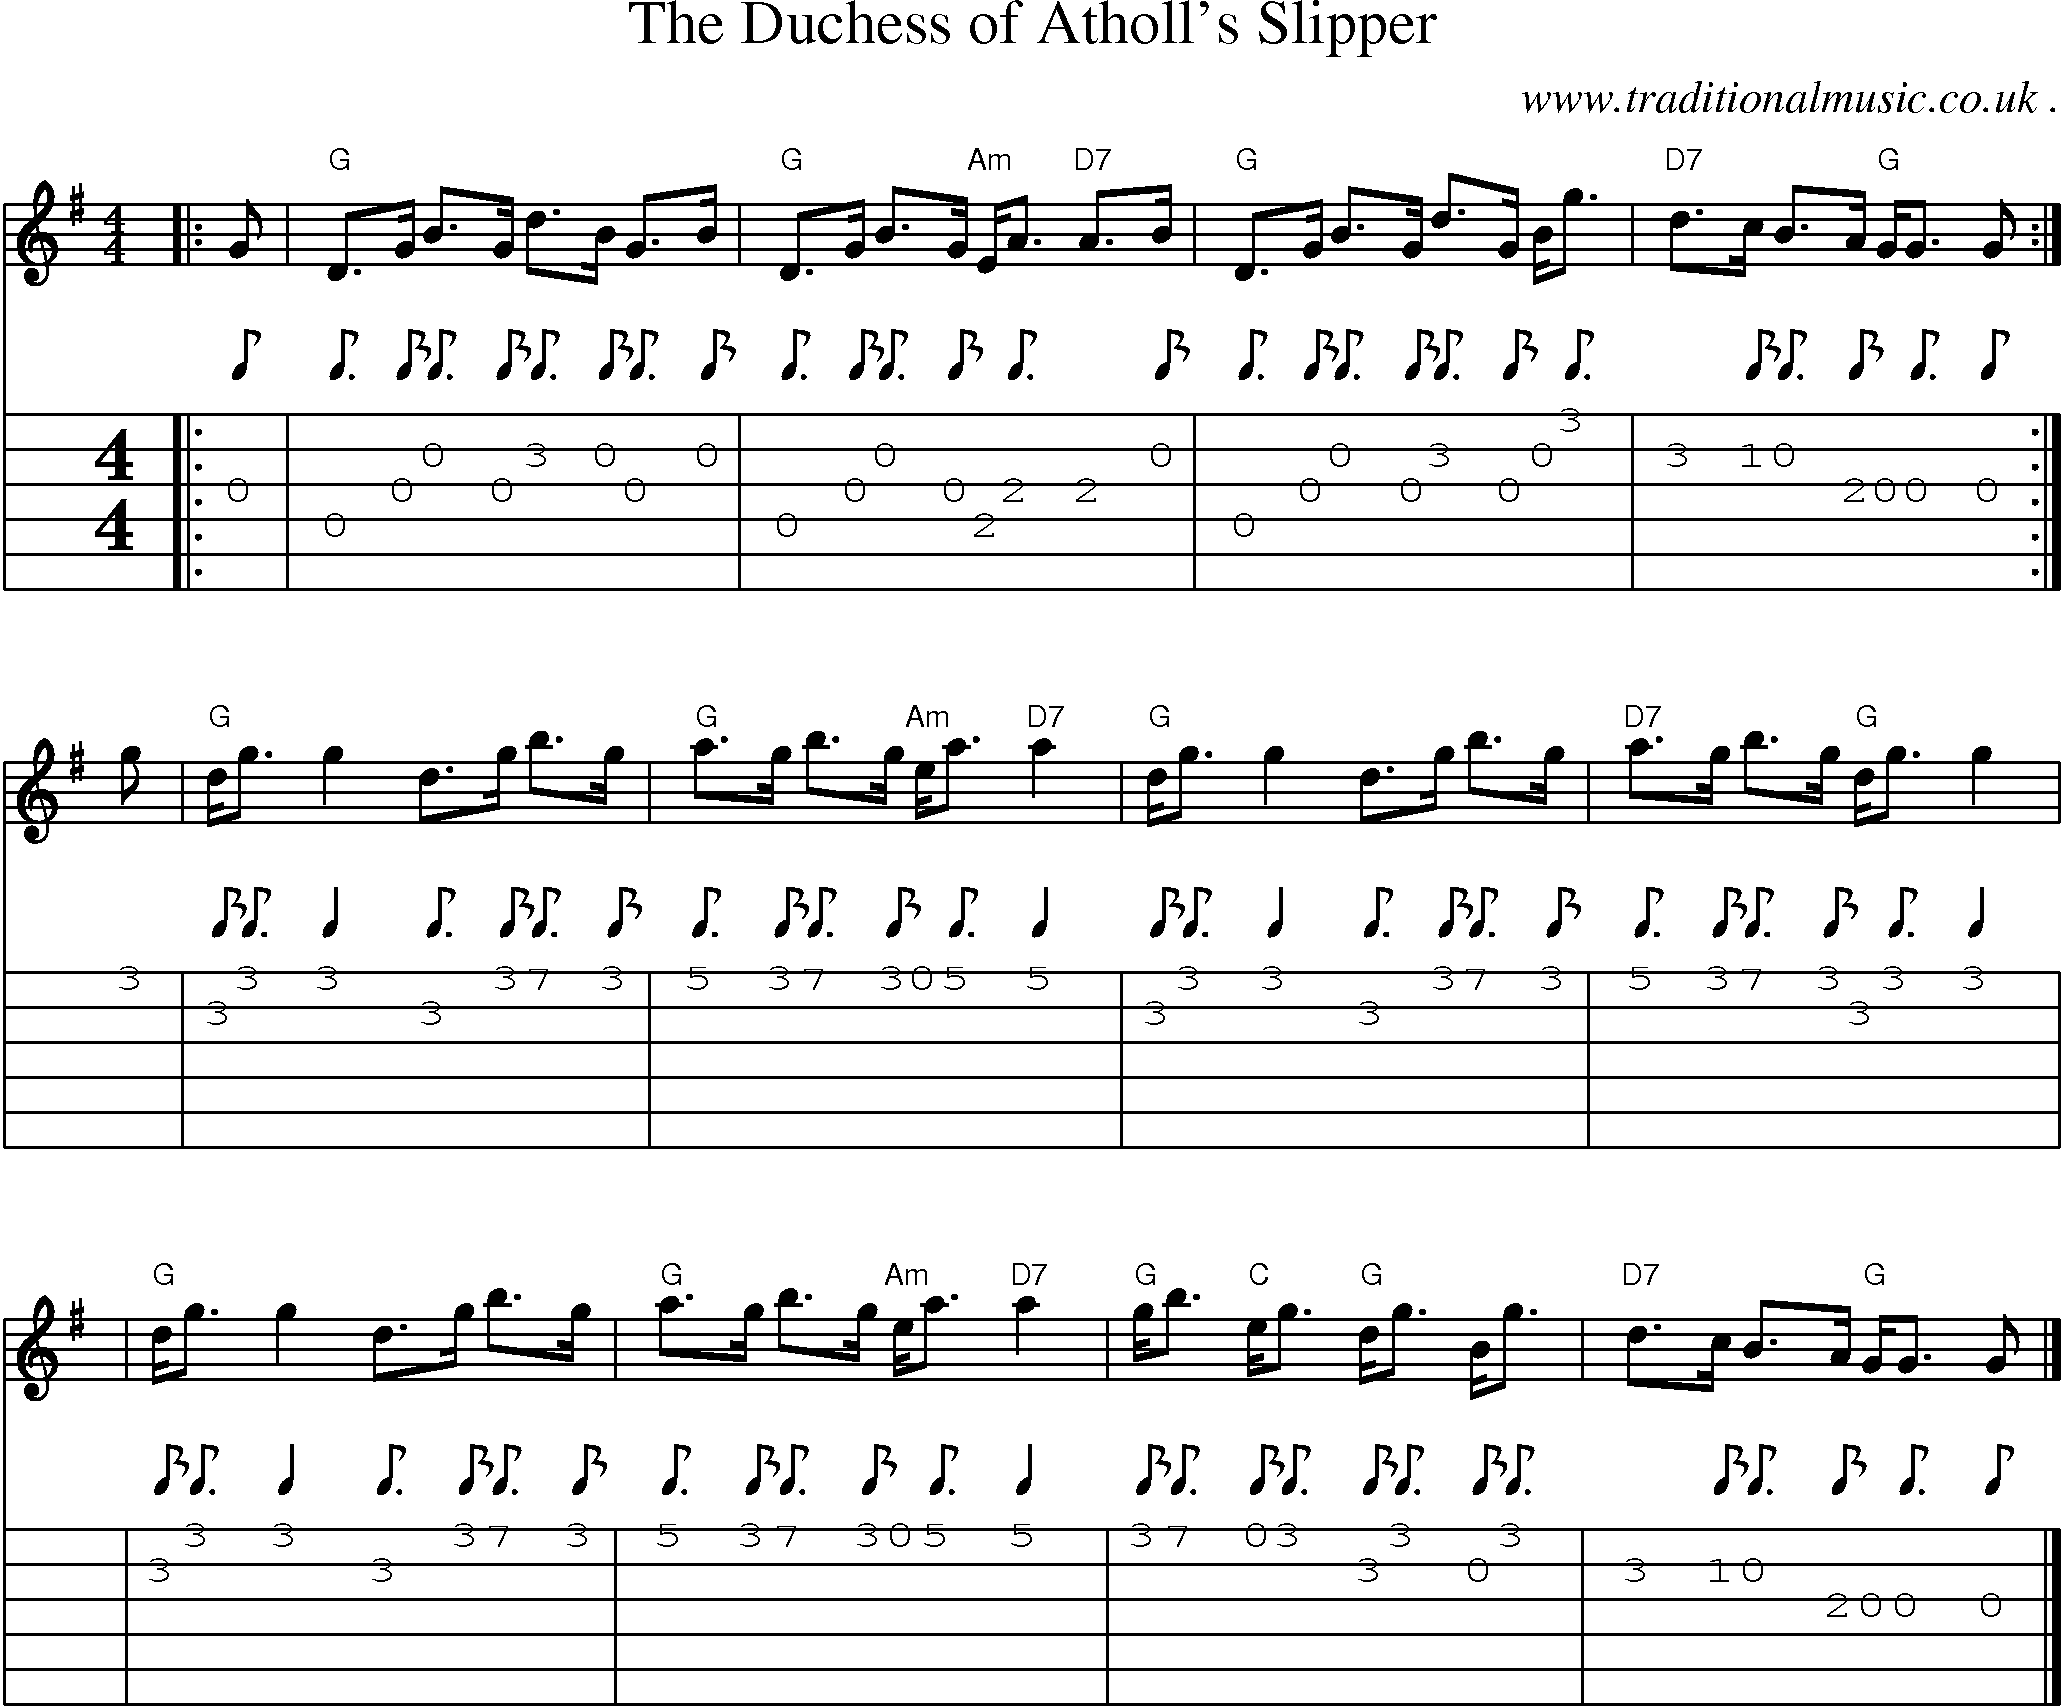 Sheet-music  score, Chords and Guitar Tabs for The Duchess Of Atholls Slipper